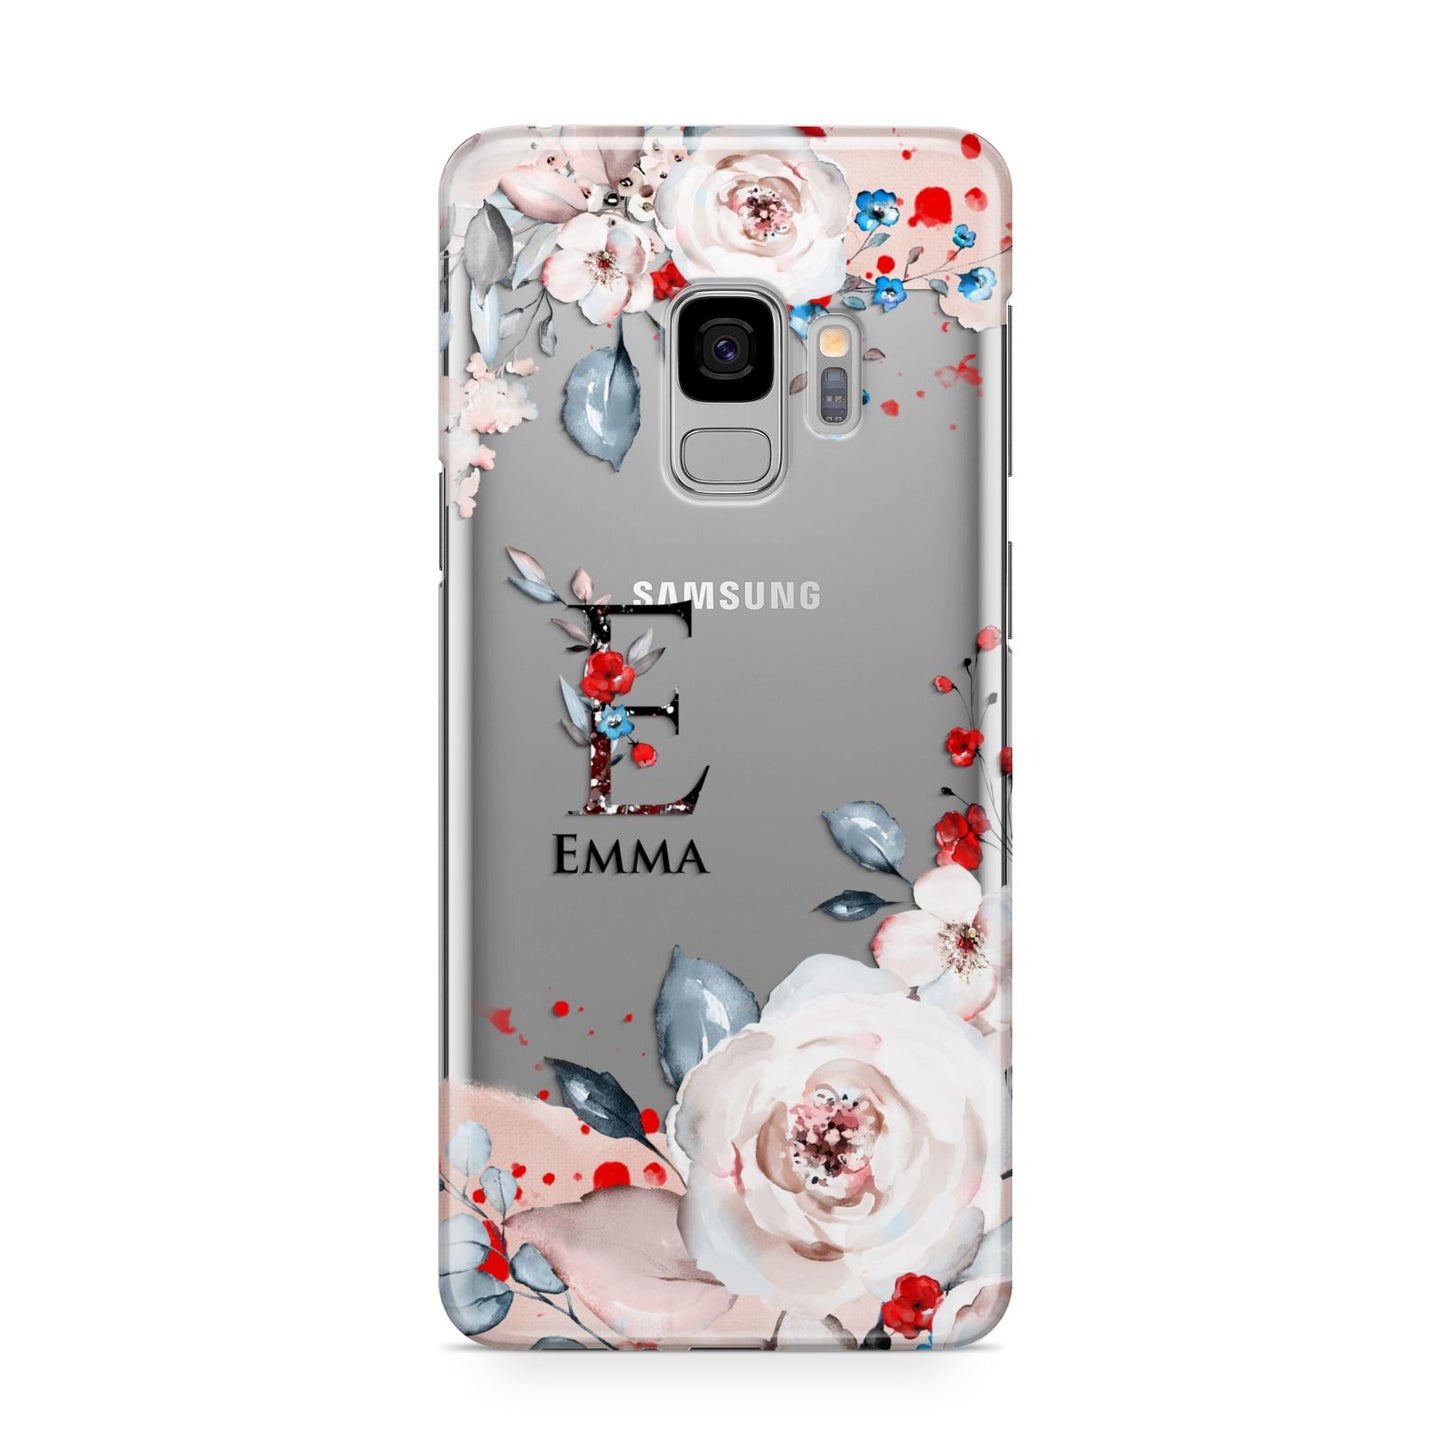 Monogrammed Roses Floral Wreath Samsung Galaxy S9 Case